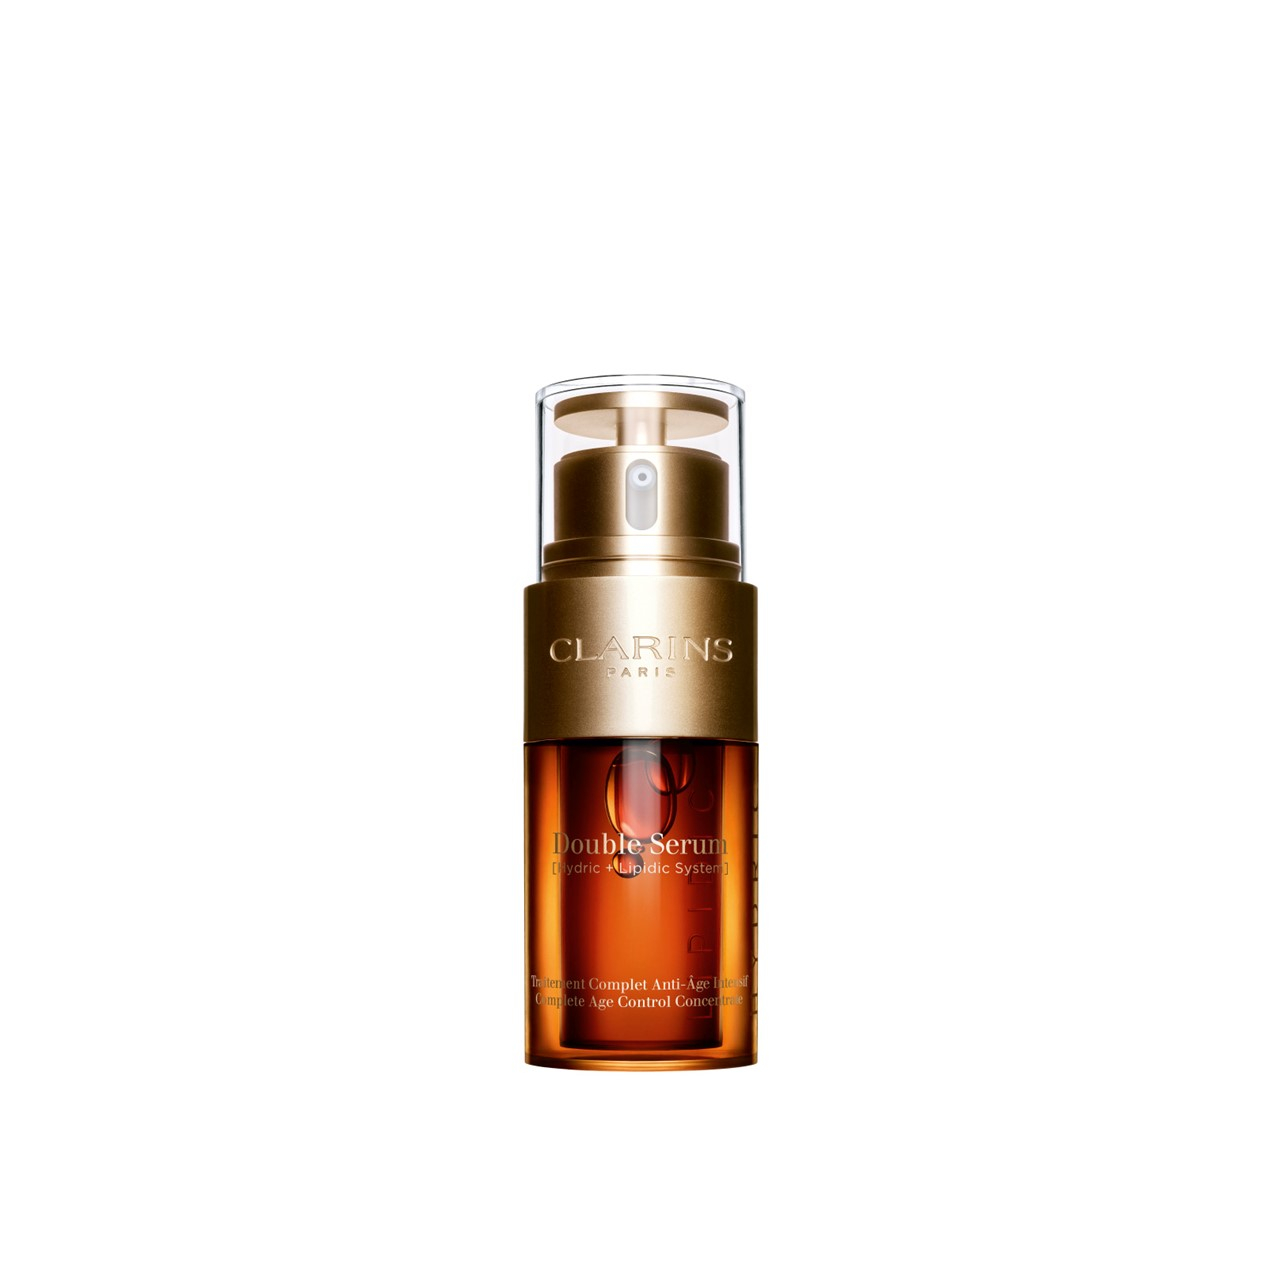 Clarins Double Serum Complete Age Control Concentrate 30ml (1.01fl oz)